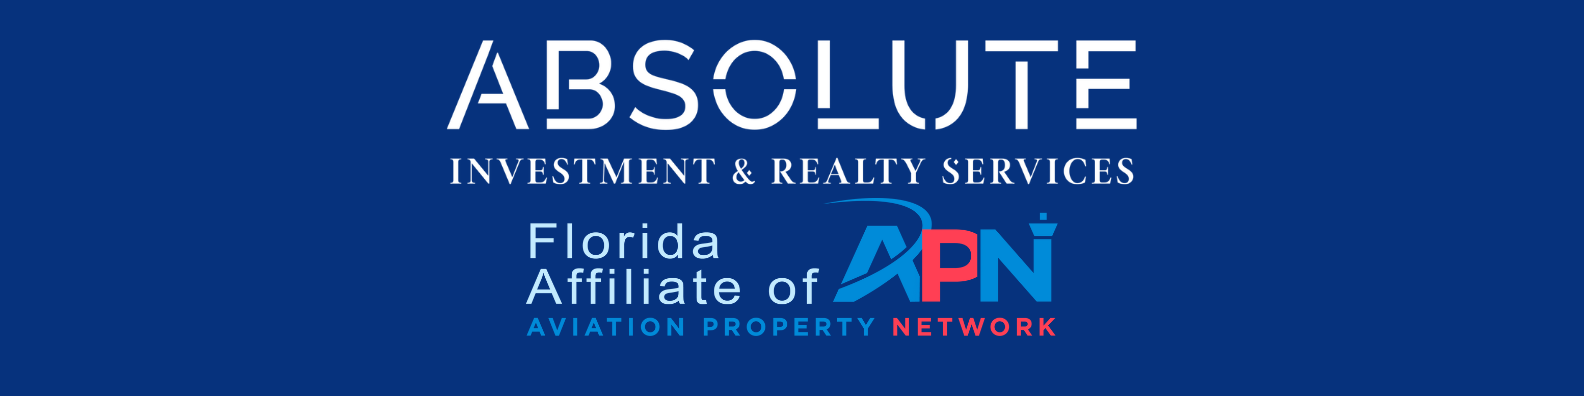 Absolute Investment & Realty Services 